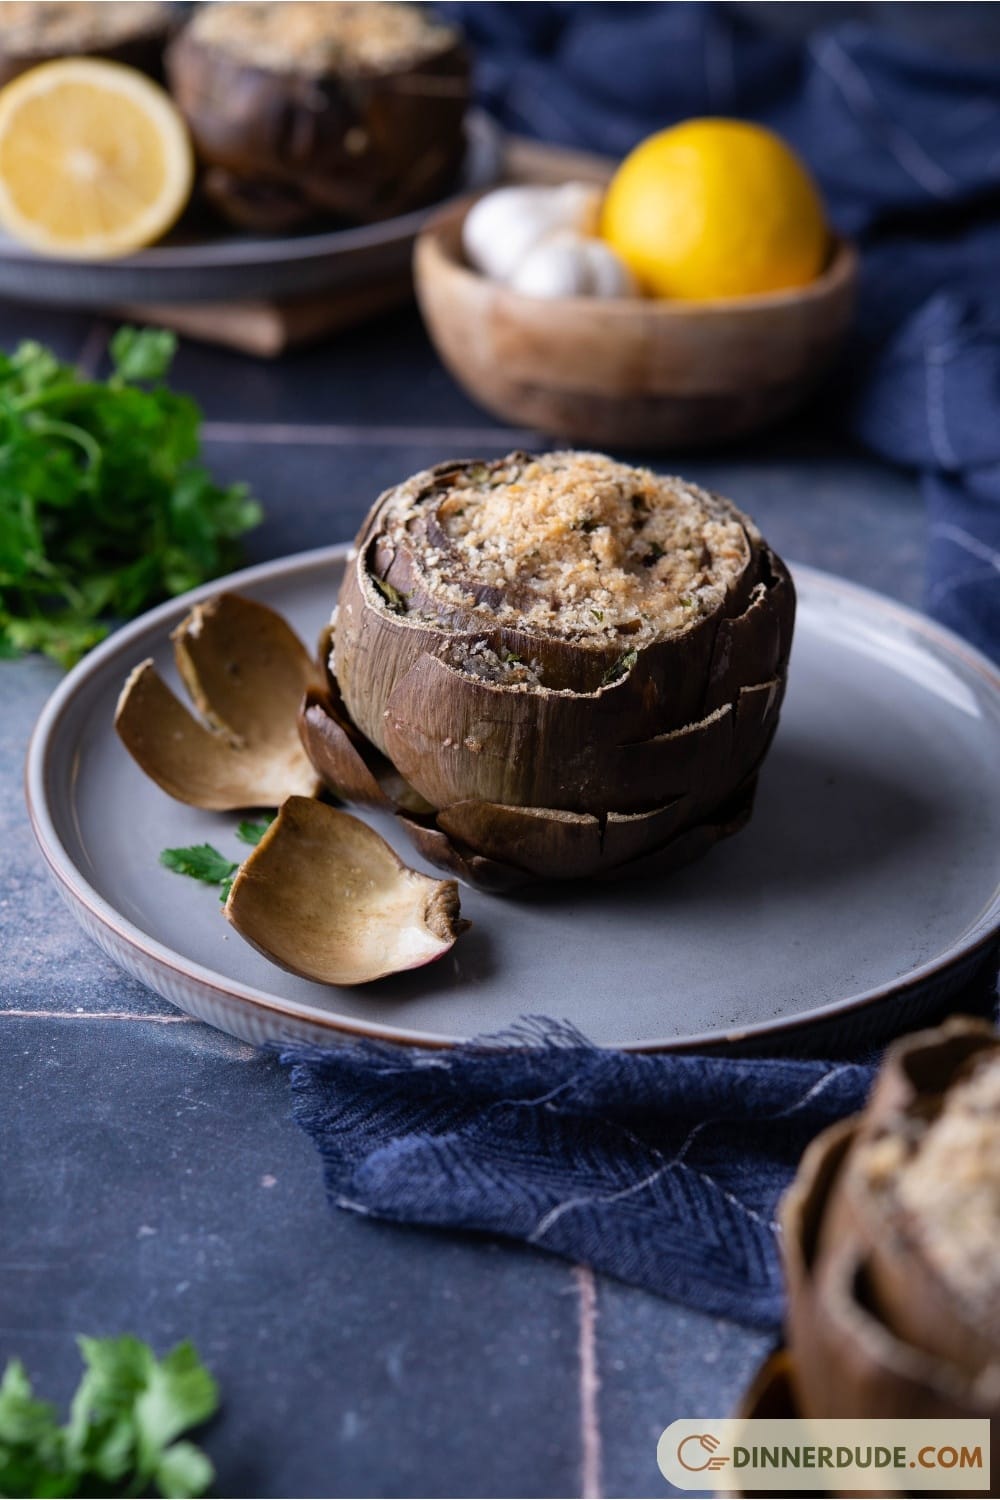 Crunchy artichokes with parsley and white wine